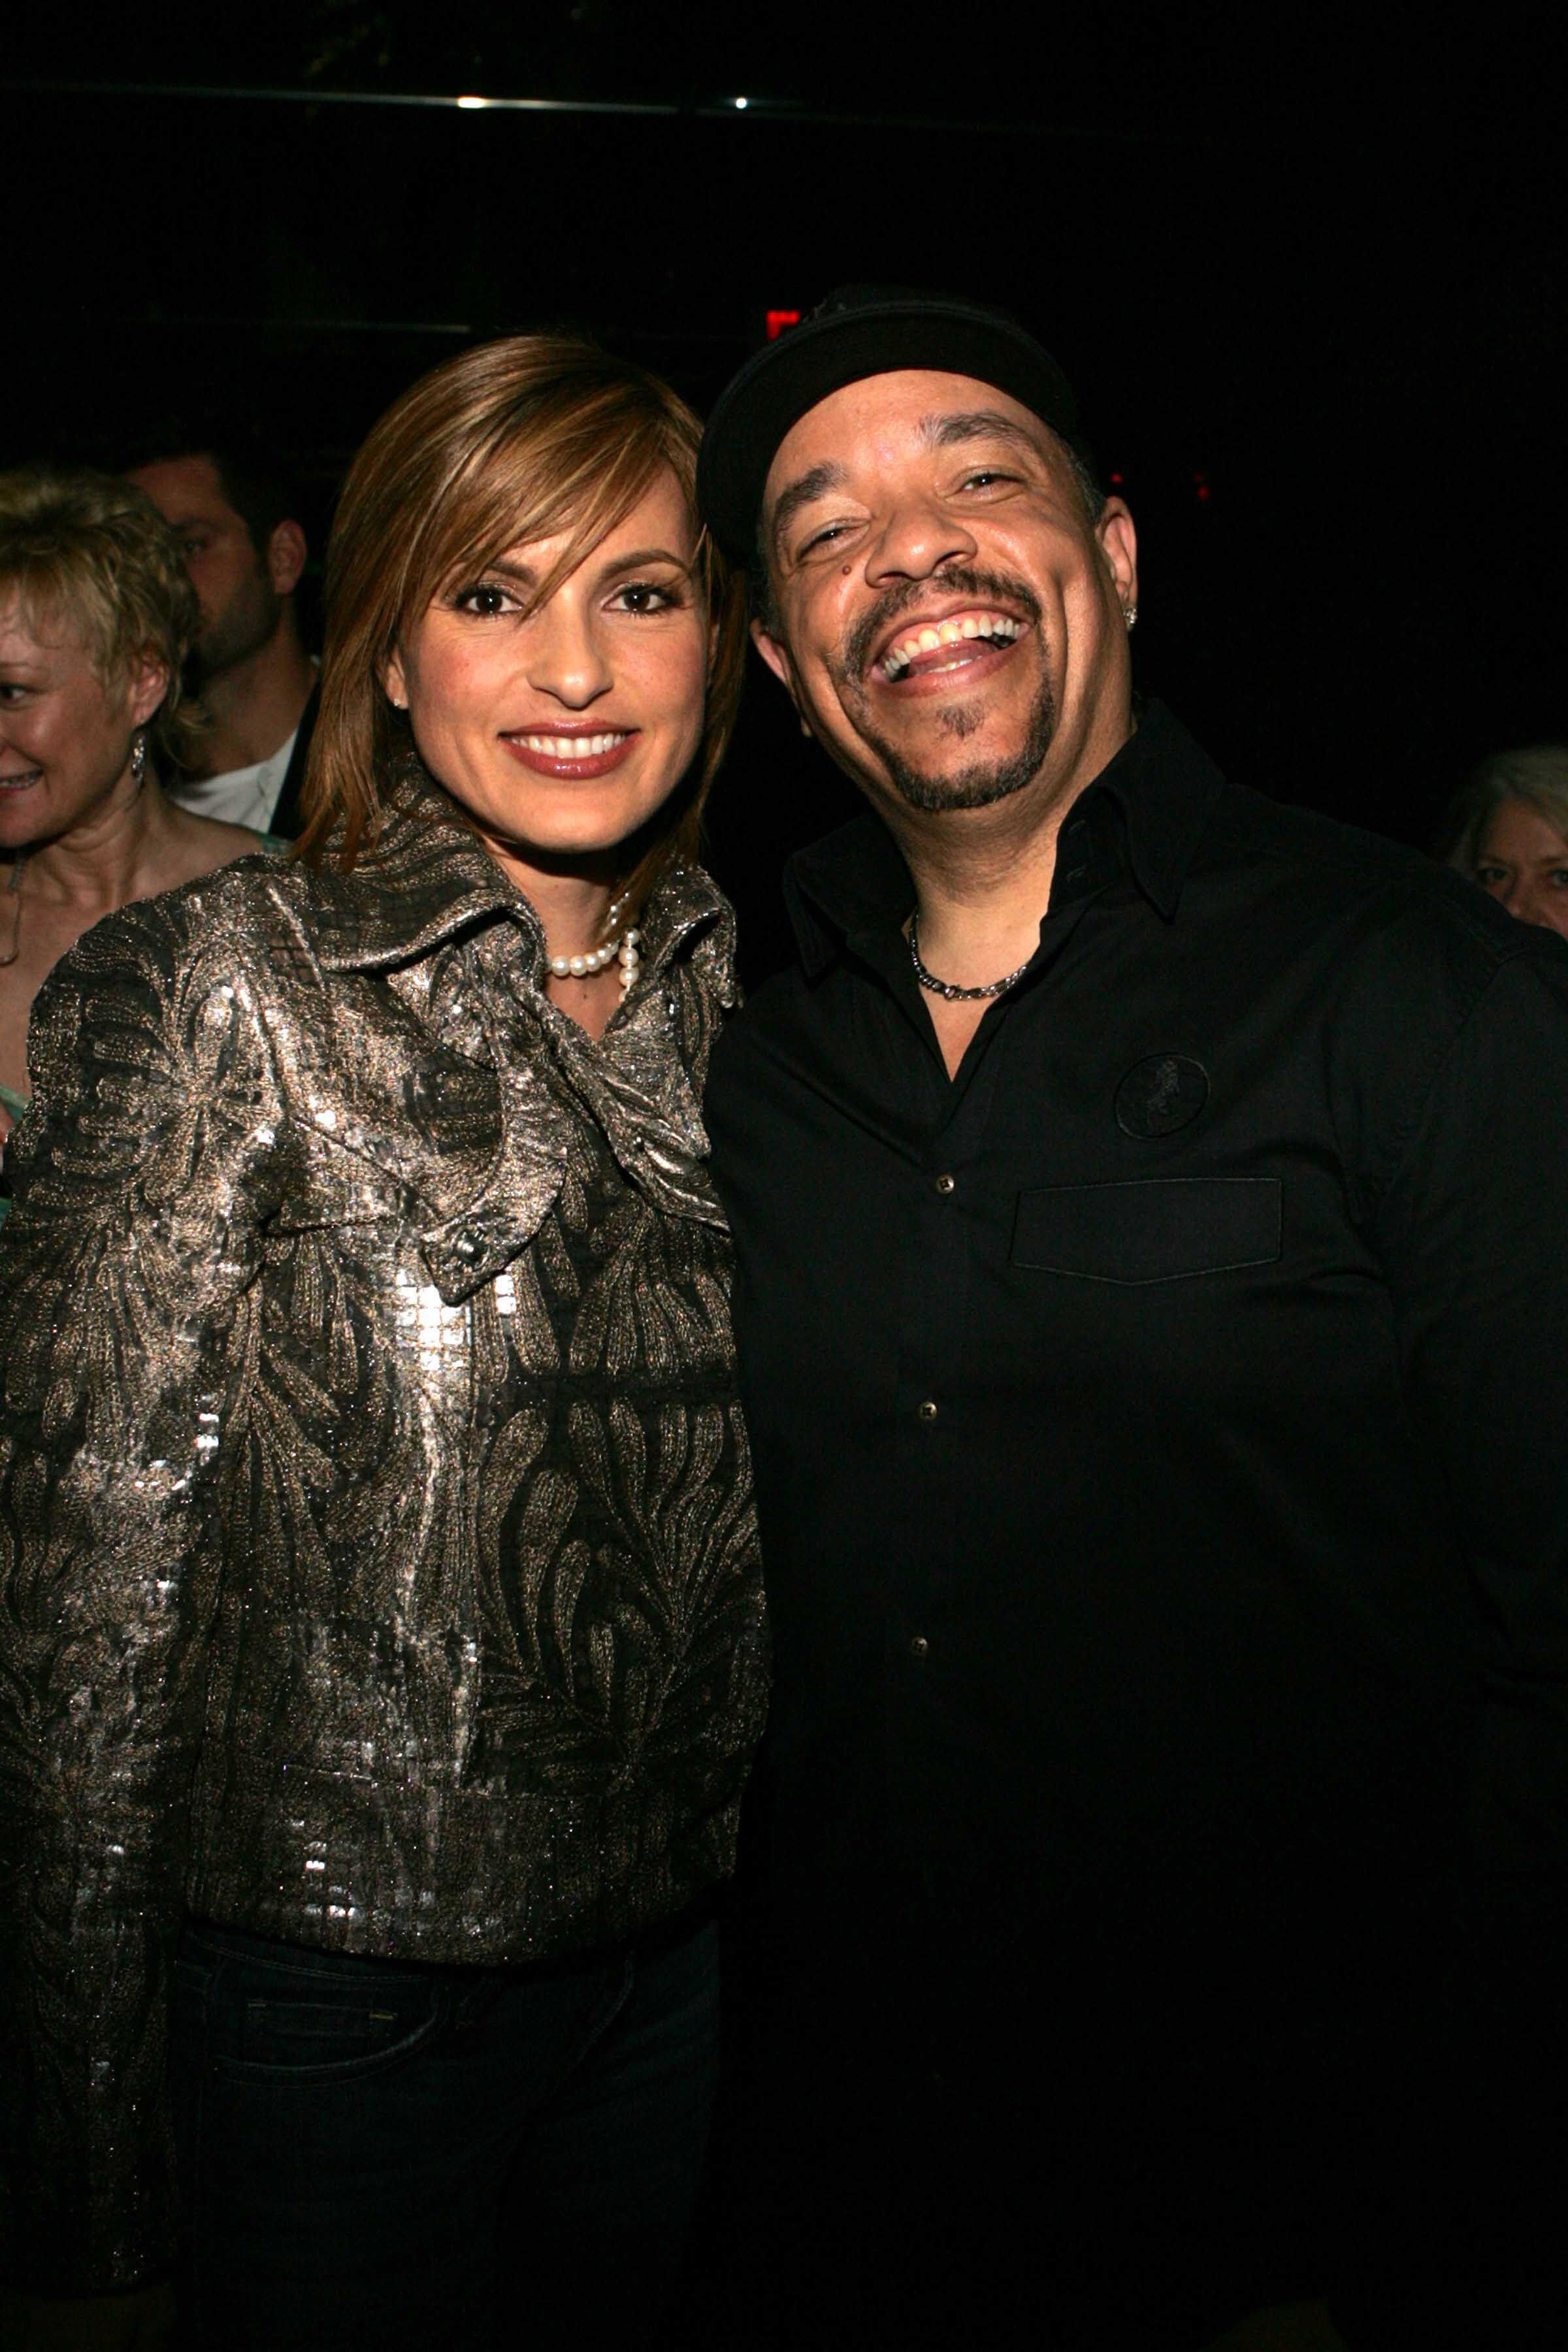 Mariska Hargitay and Ice-T at a fundraiser to benefit the Boys and Girls Clubs of Mt. Vernon | Source: Getty Images